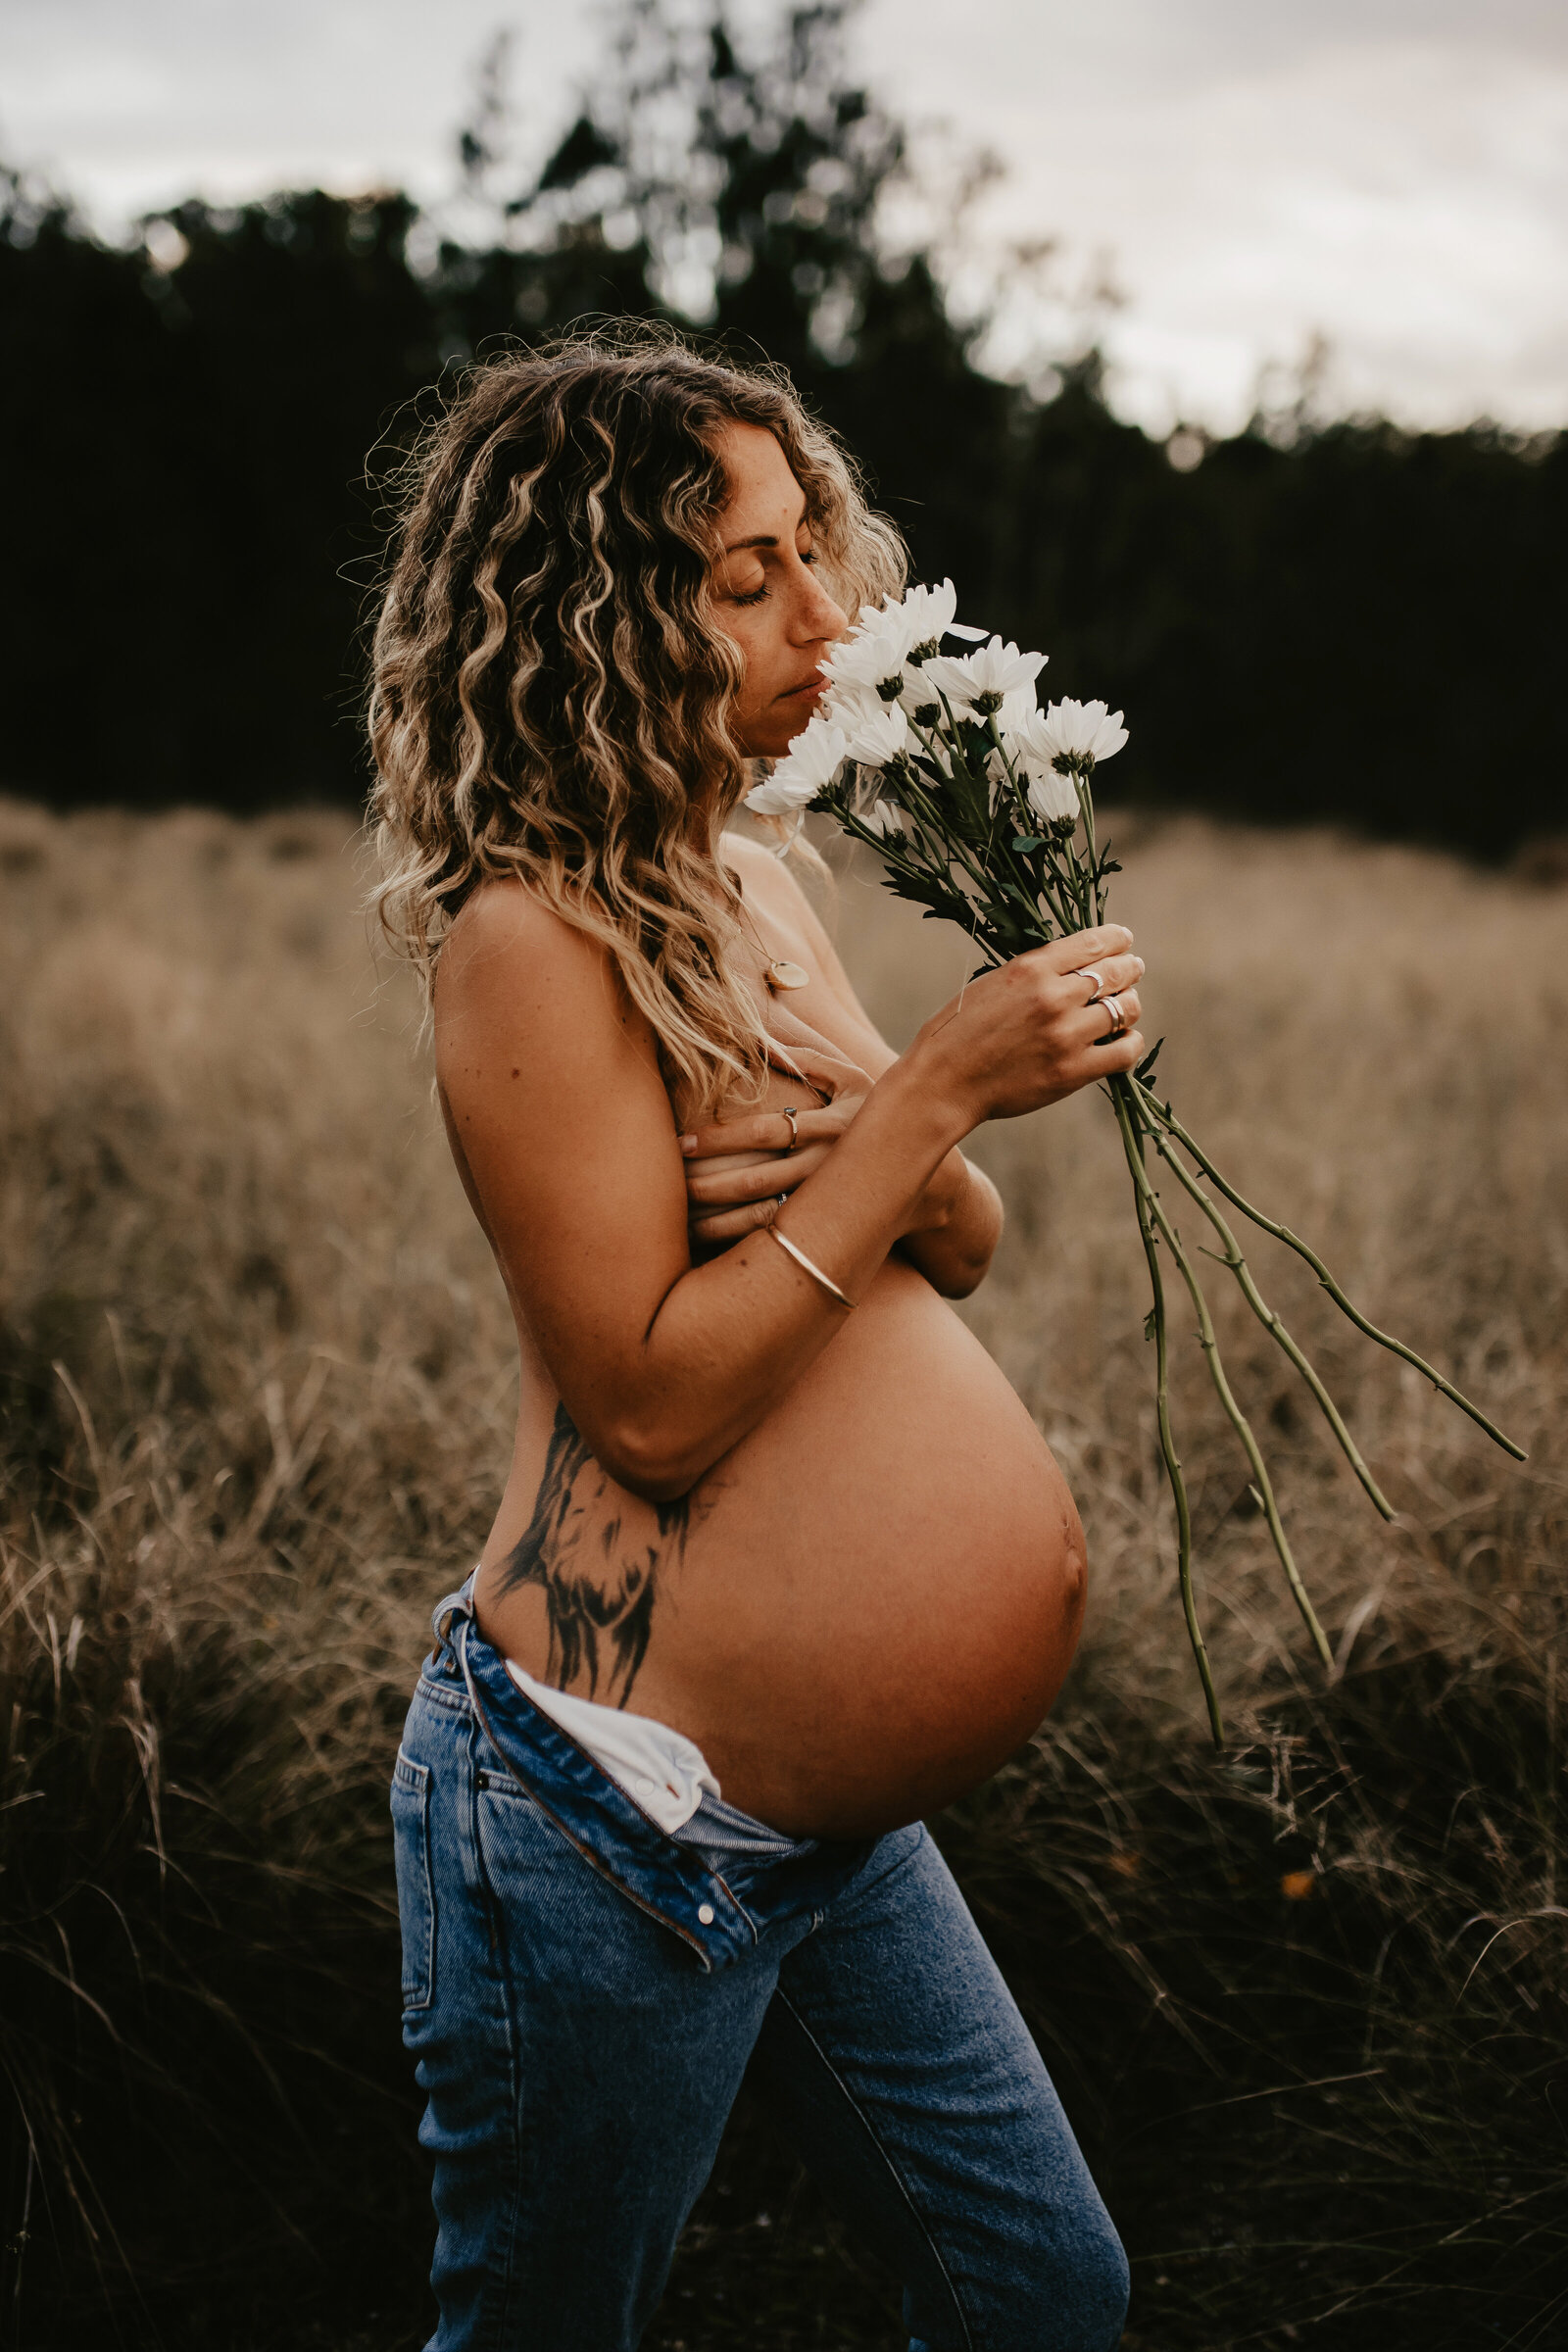 A pregnant person with curly hair holds white flowers and wears blue jeans in an outdoor grassy field, captured beautifully by a family photographer.